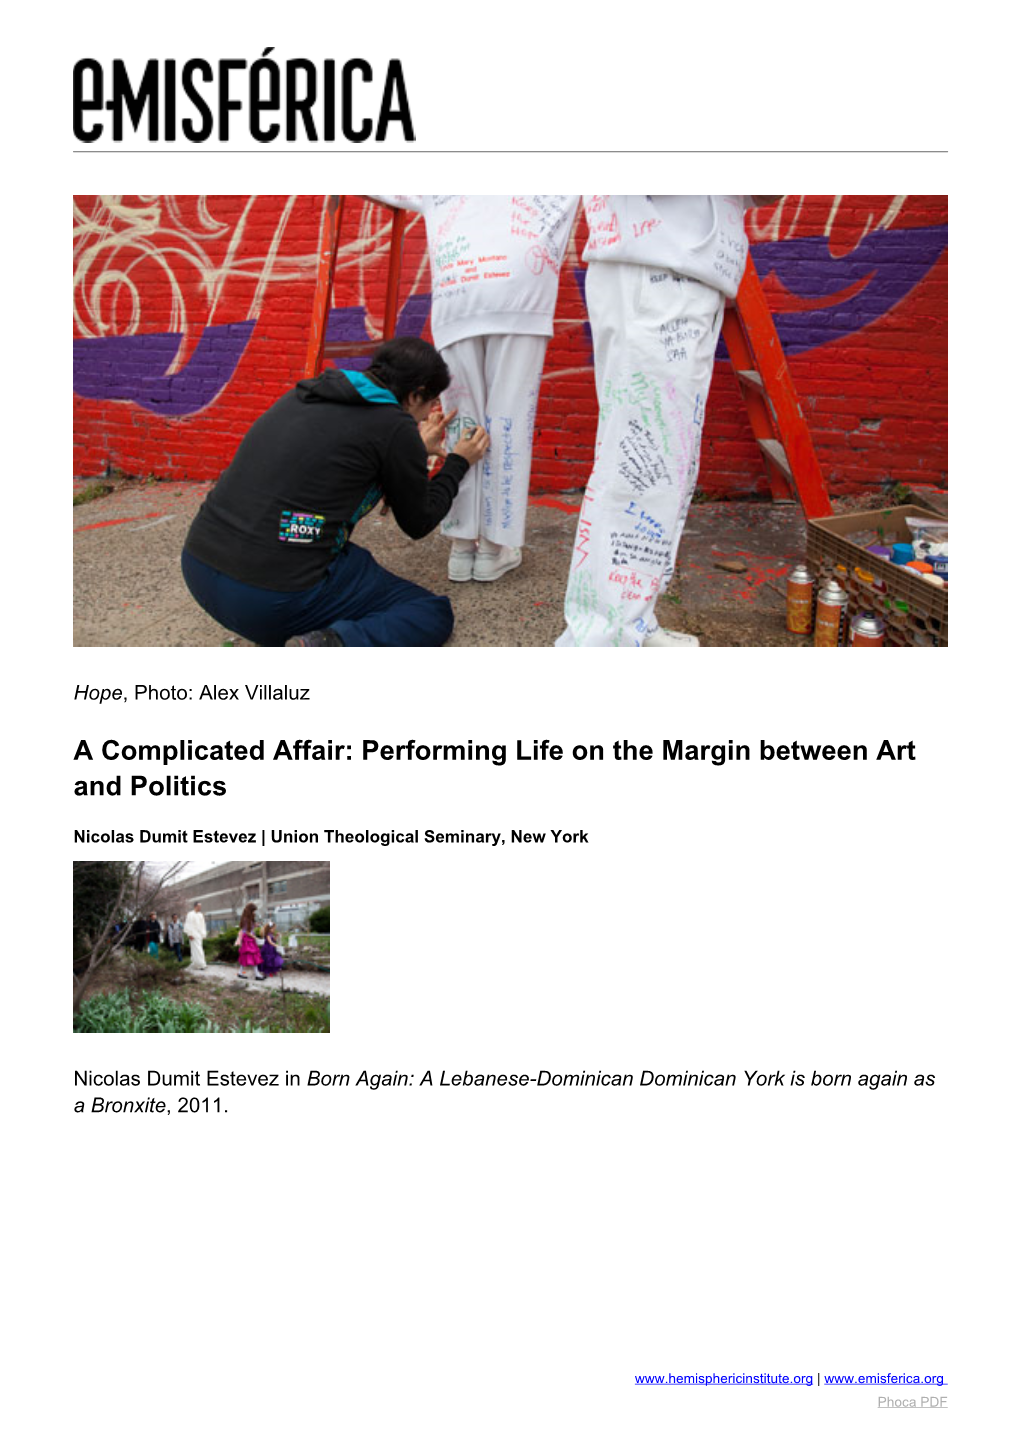 A Complicated Affair: Performing Life on the Margin Between Art and Politics